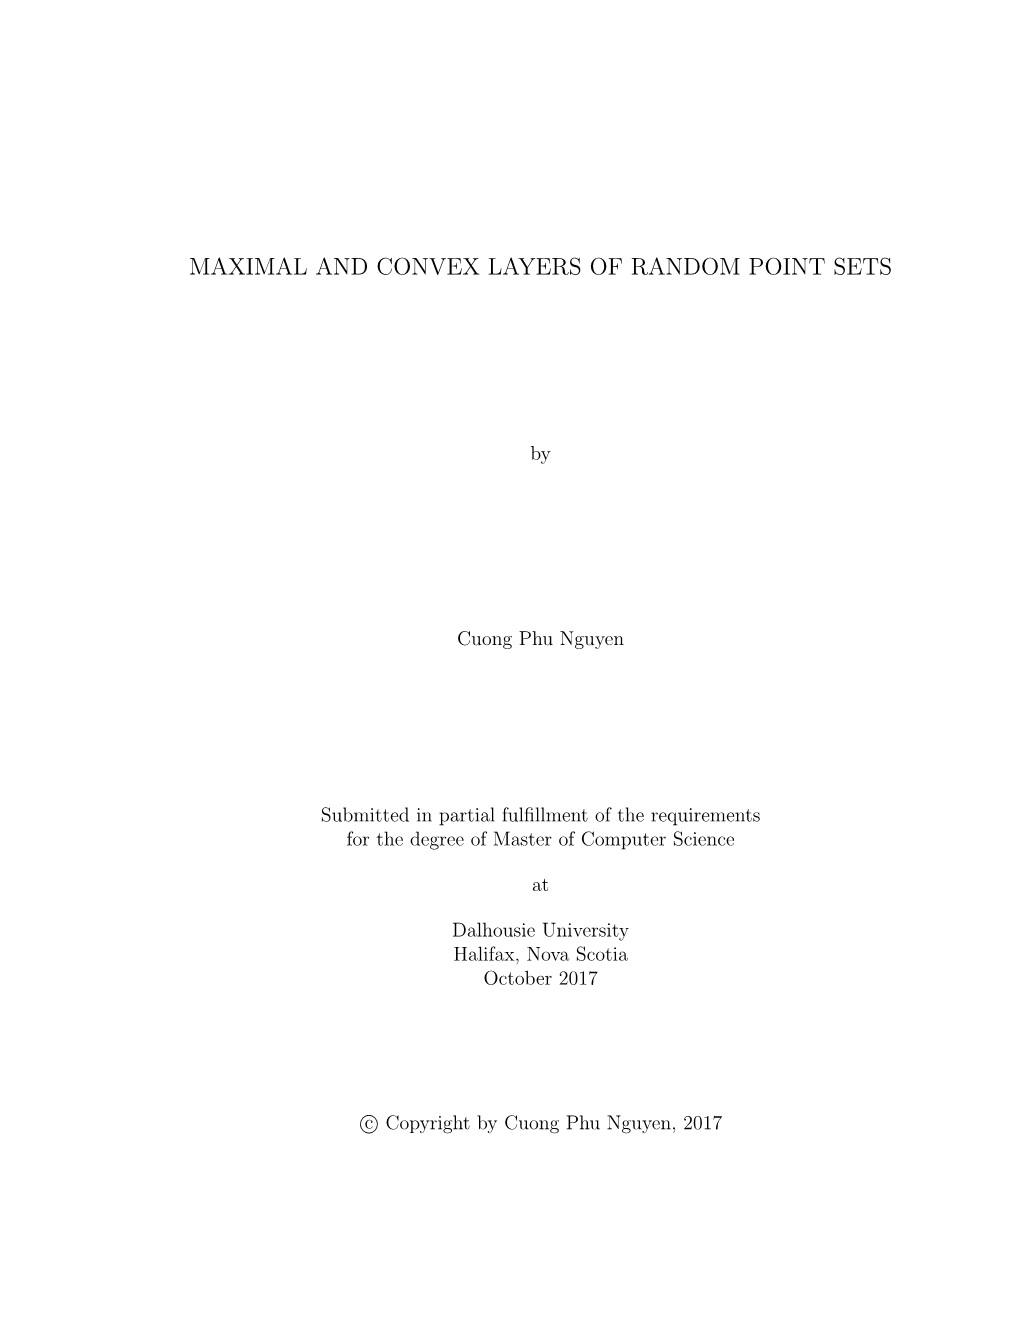 Maximal and Convex Layers of Random Point Sets